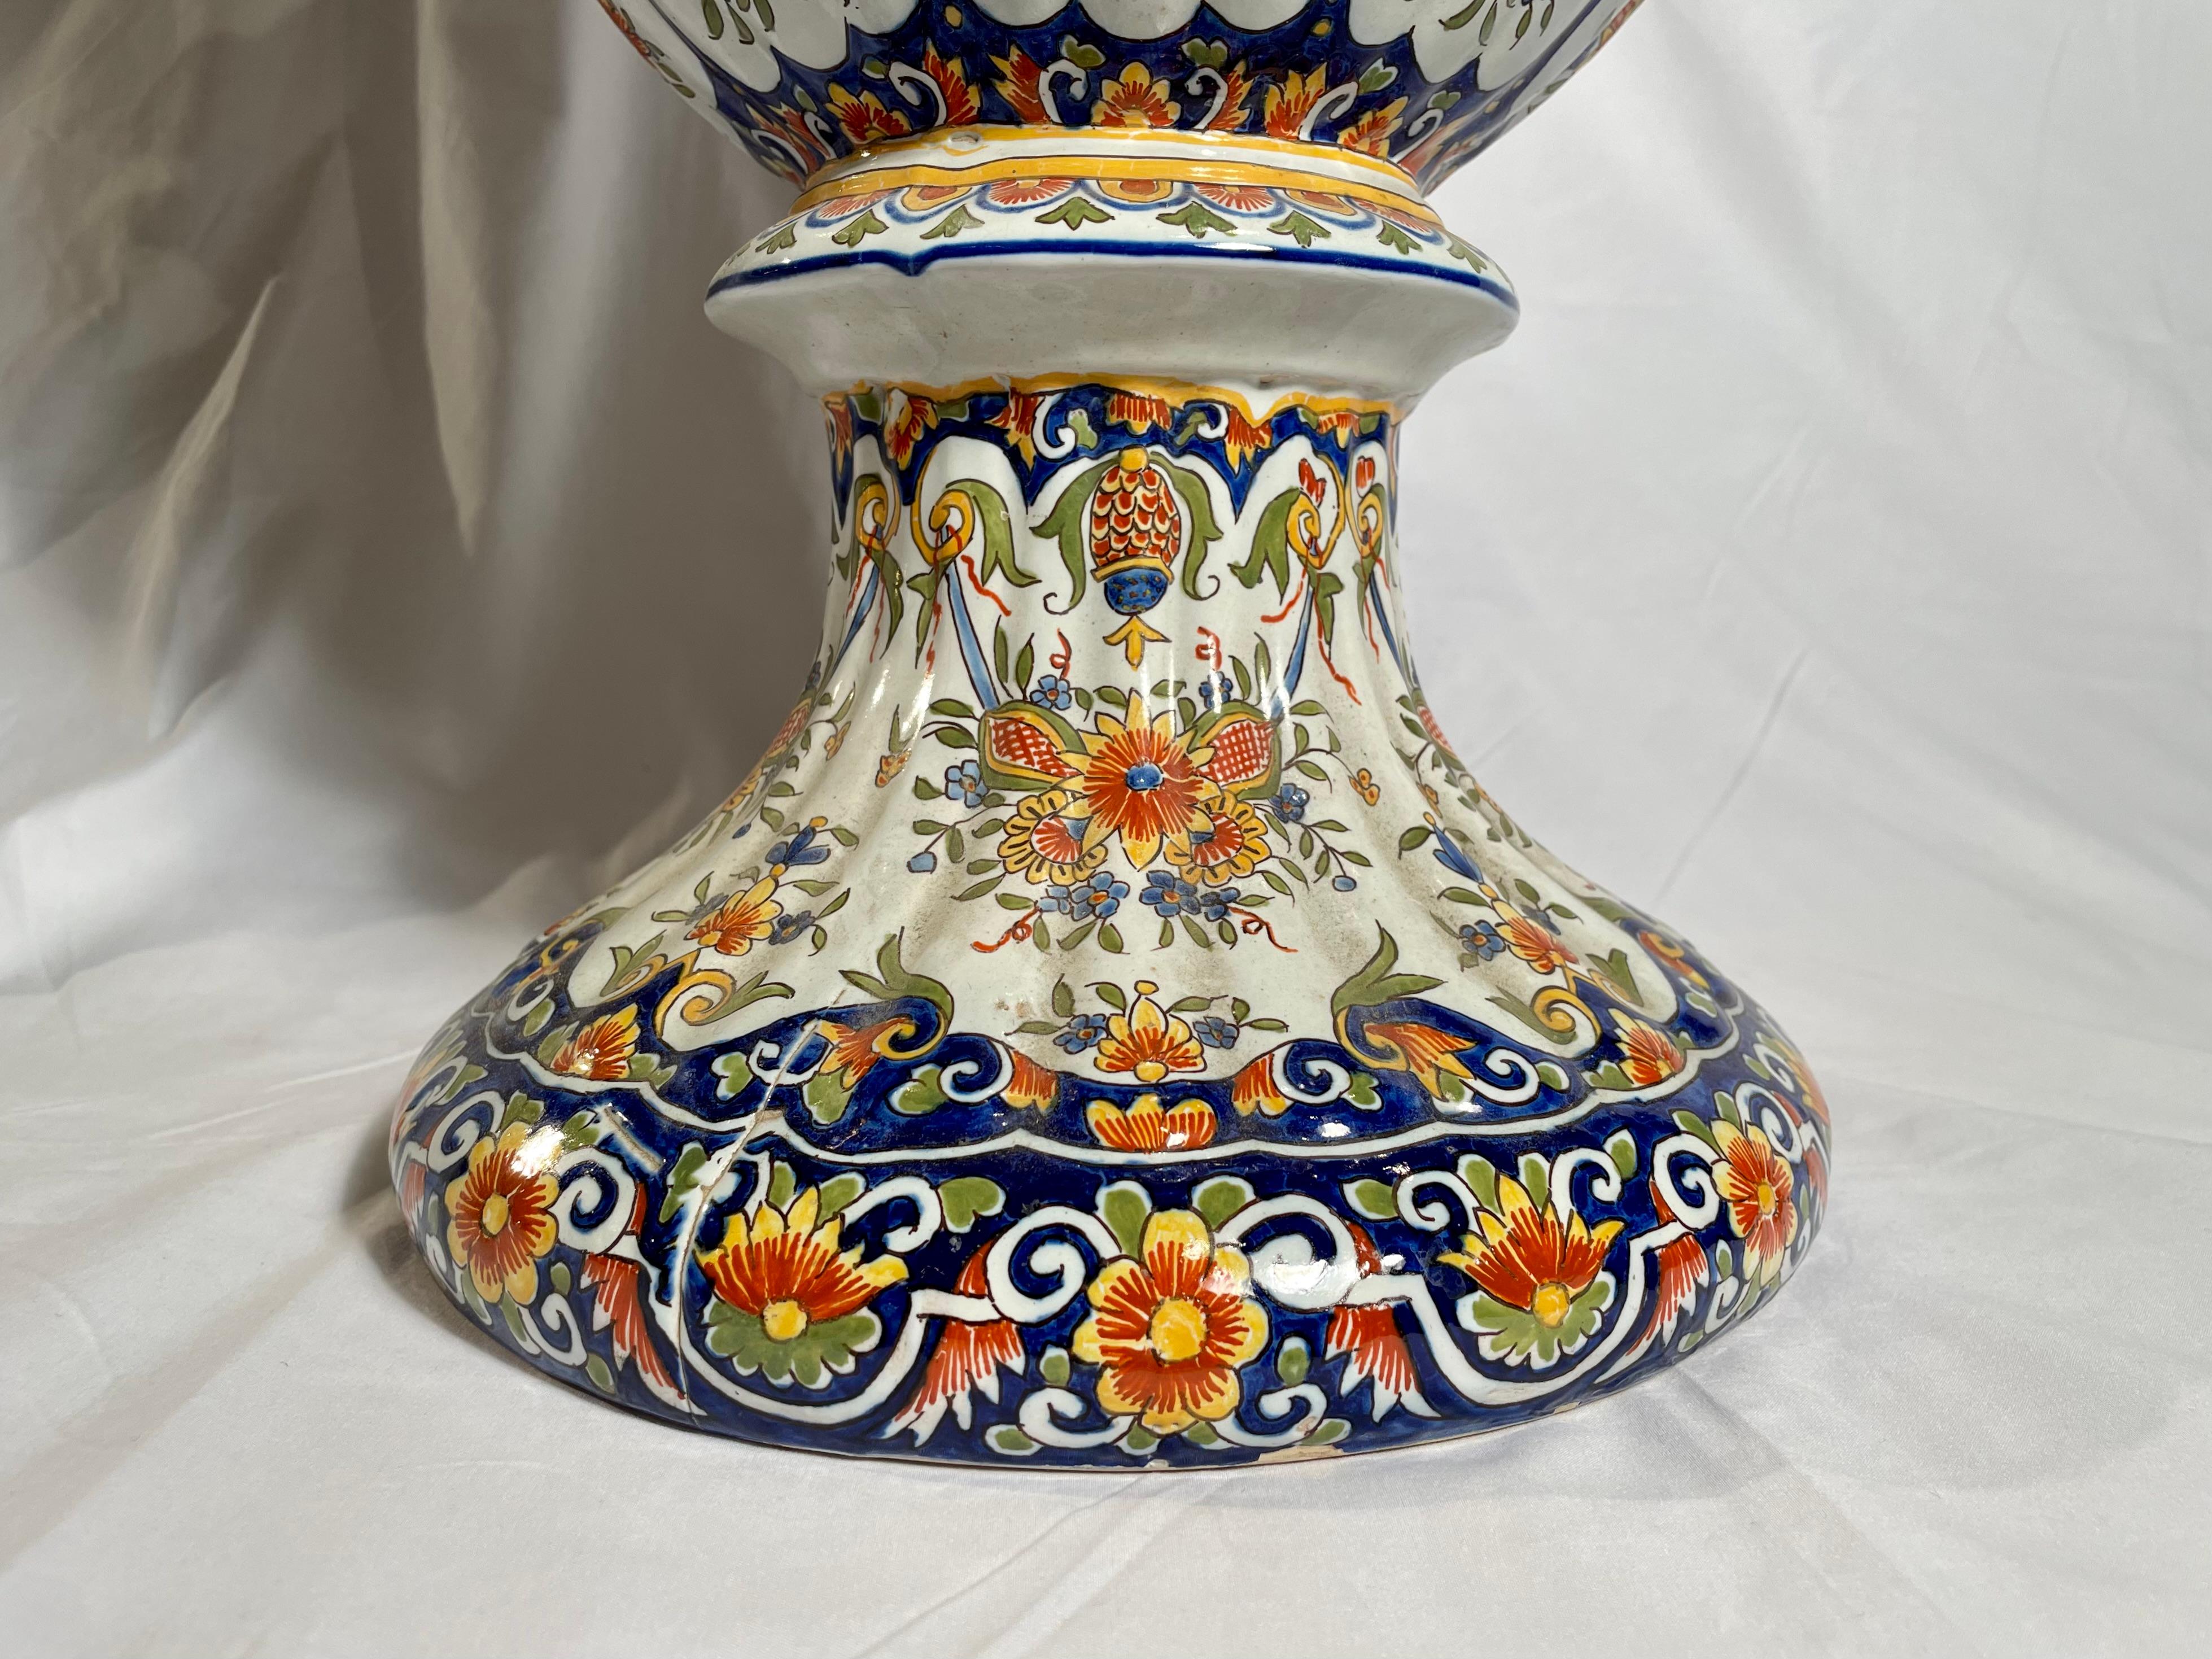 Antique French Faience Enameled Urn, circa 1900-1910 For Sale 1